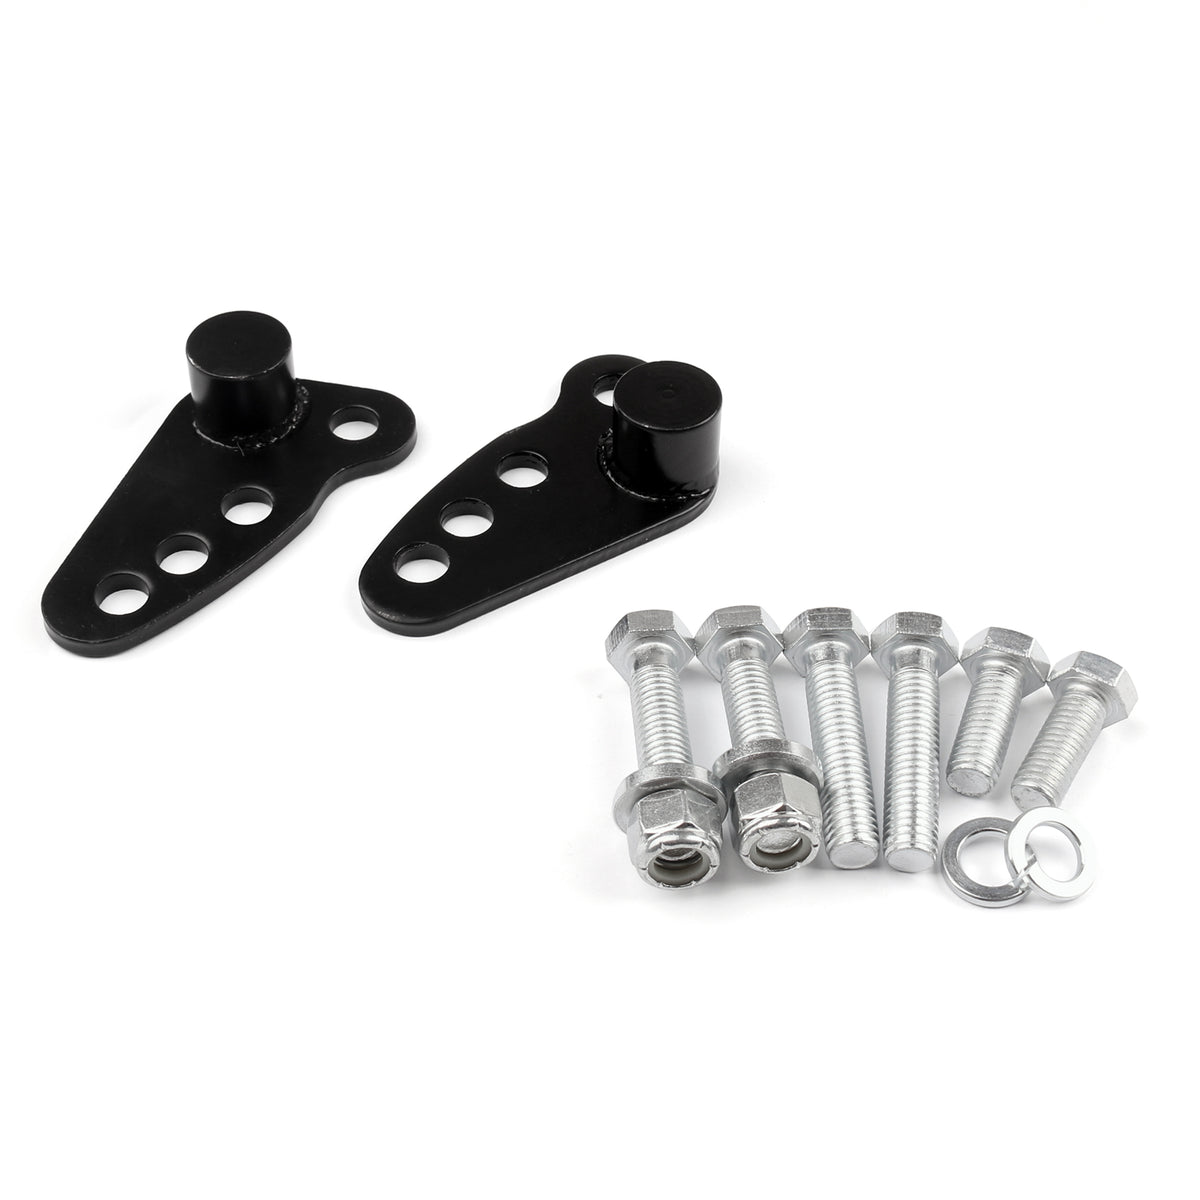 1-3inches Rear Adjustable Lowering Kit For Electra Road Glide Touring 2002-2015